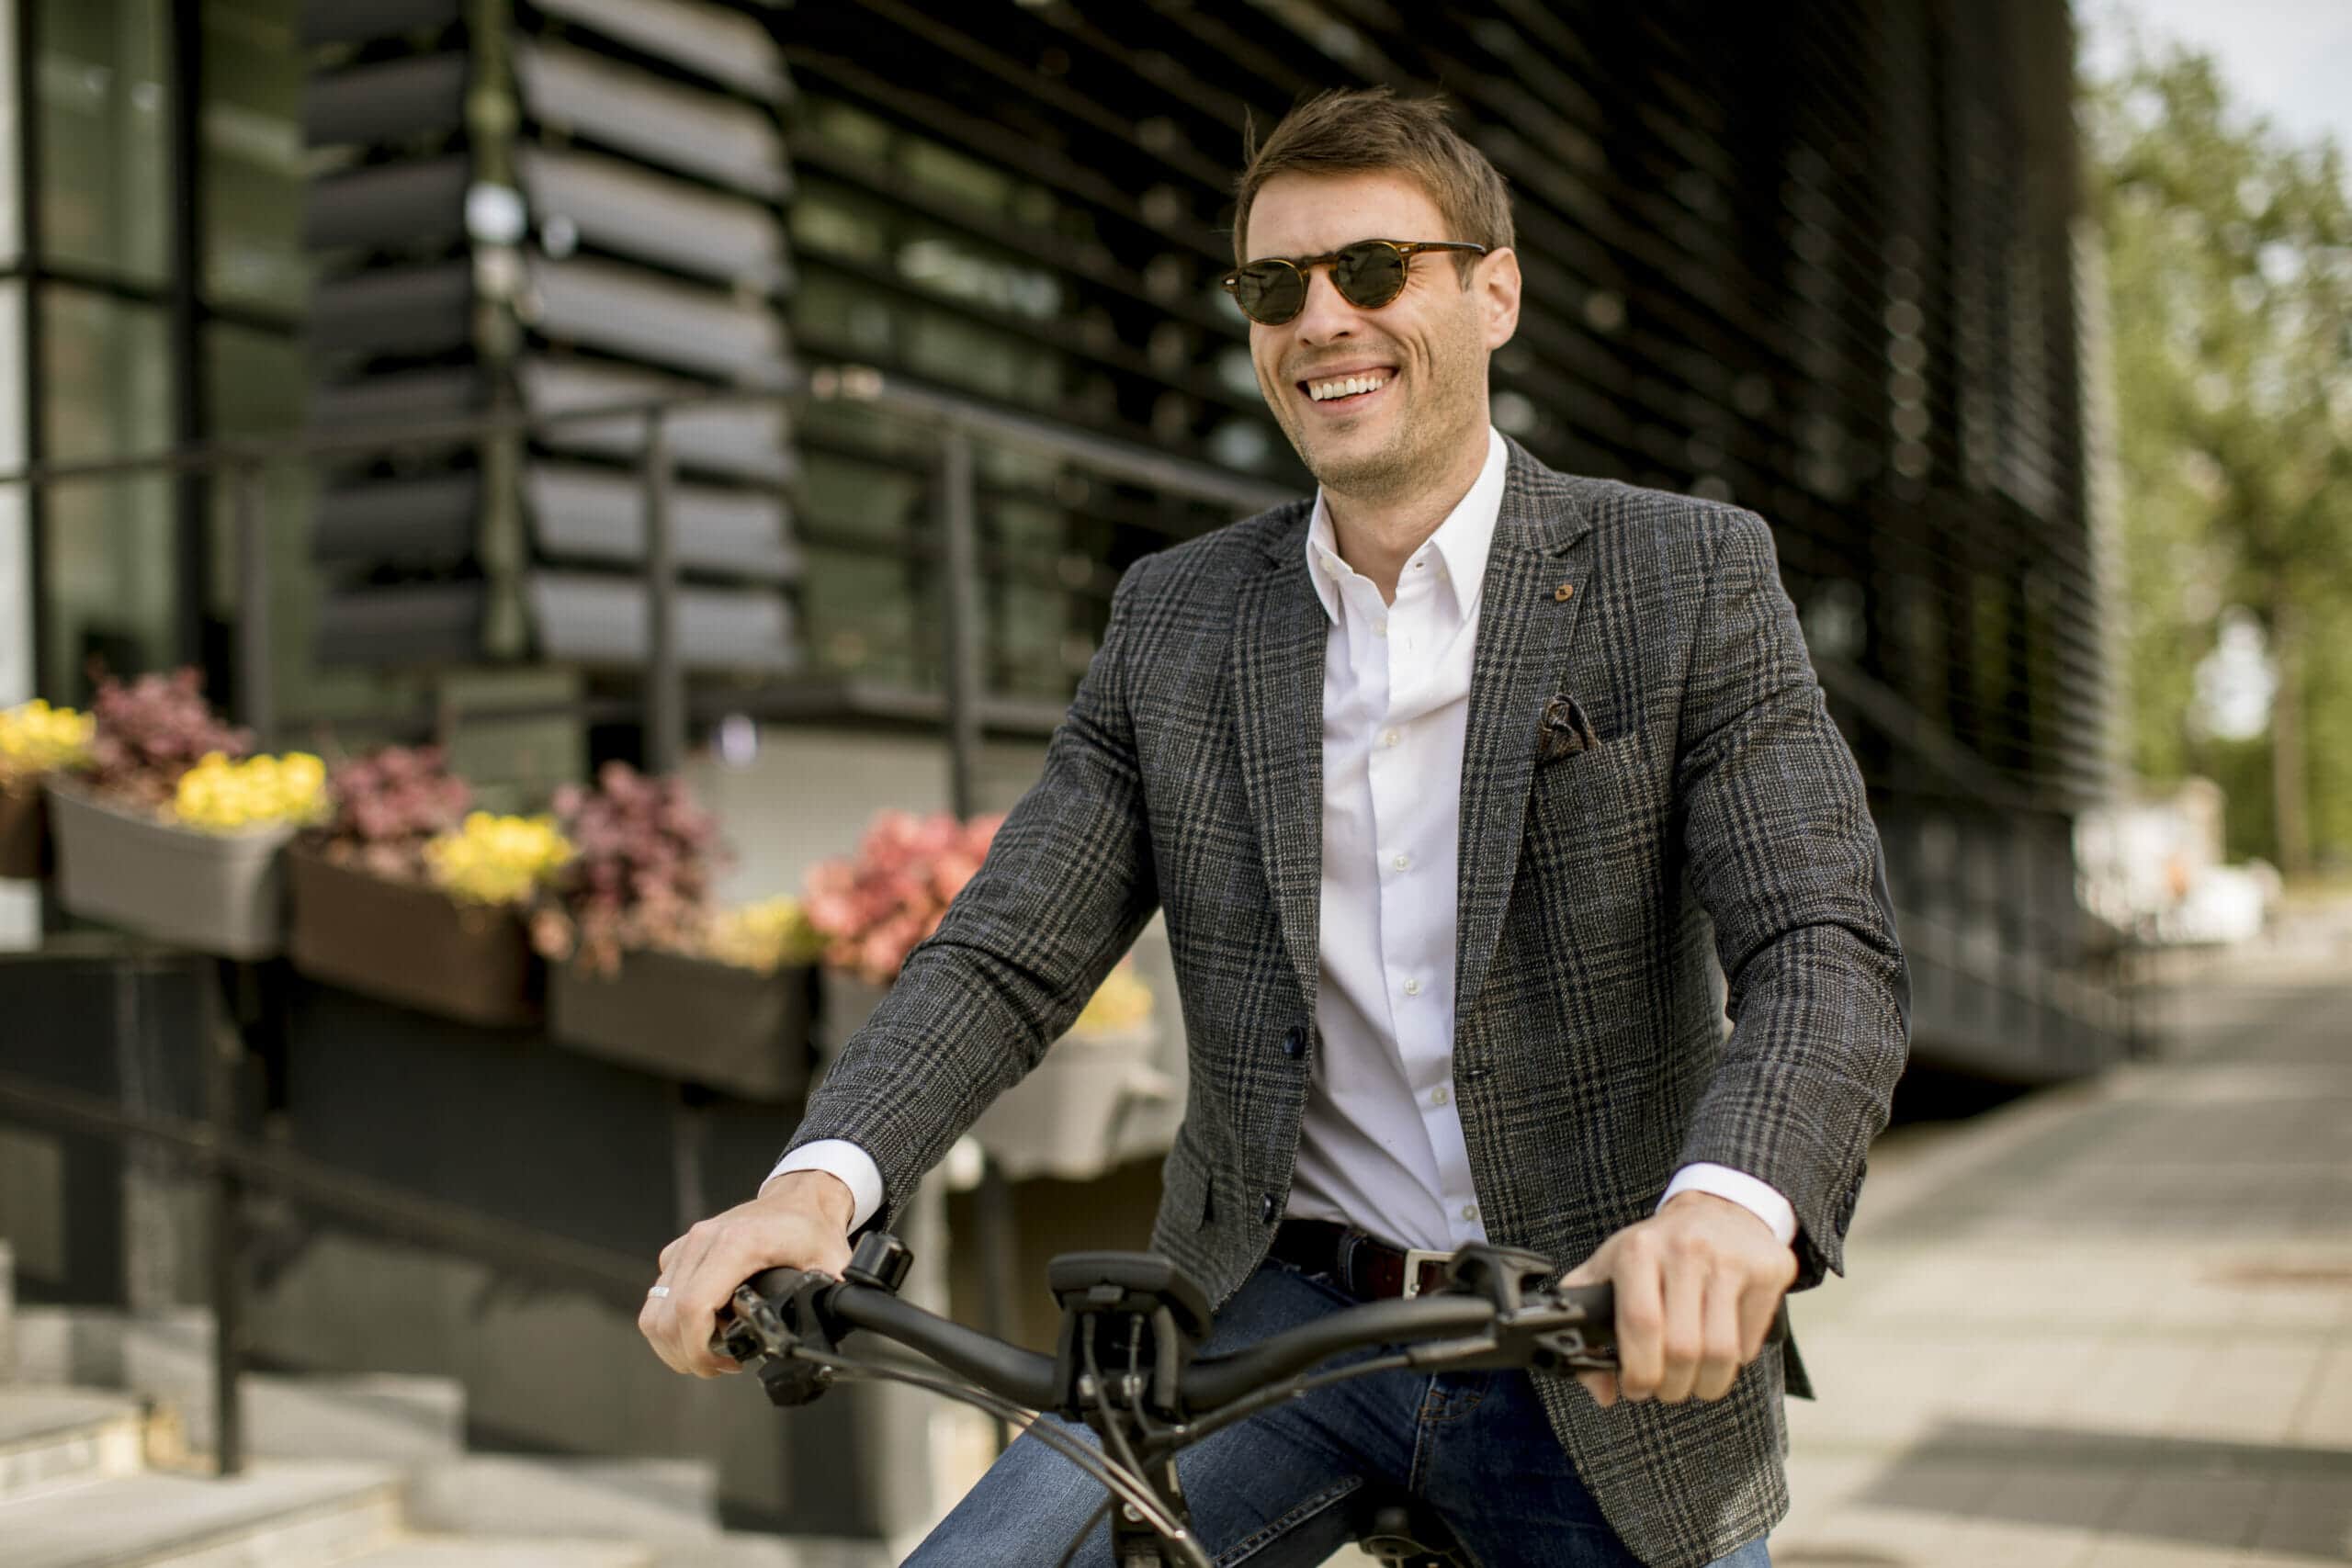 young businessman on the ebike 2022 04 19 01 53 46 utc scaled